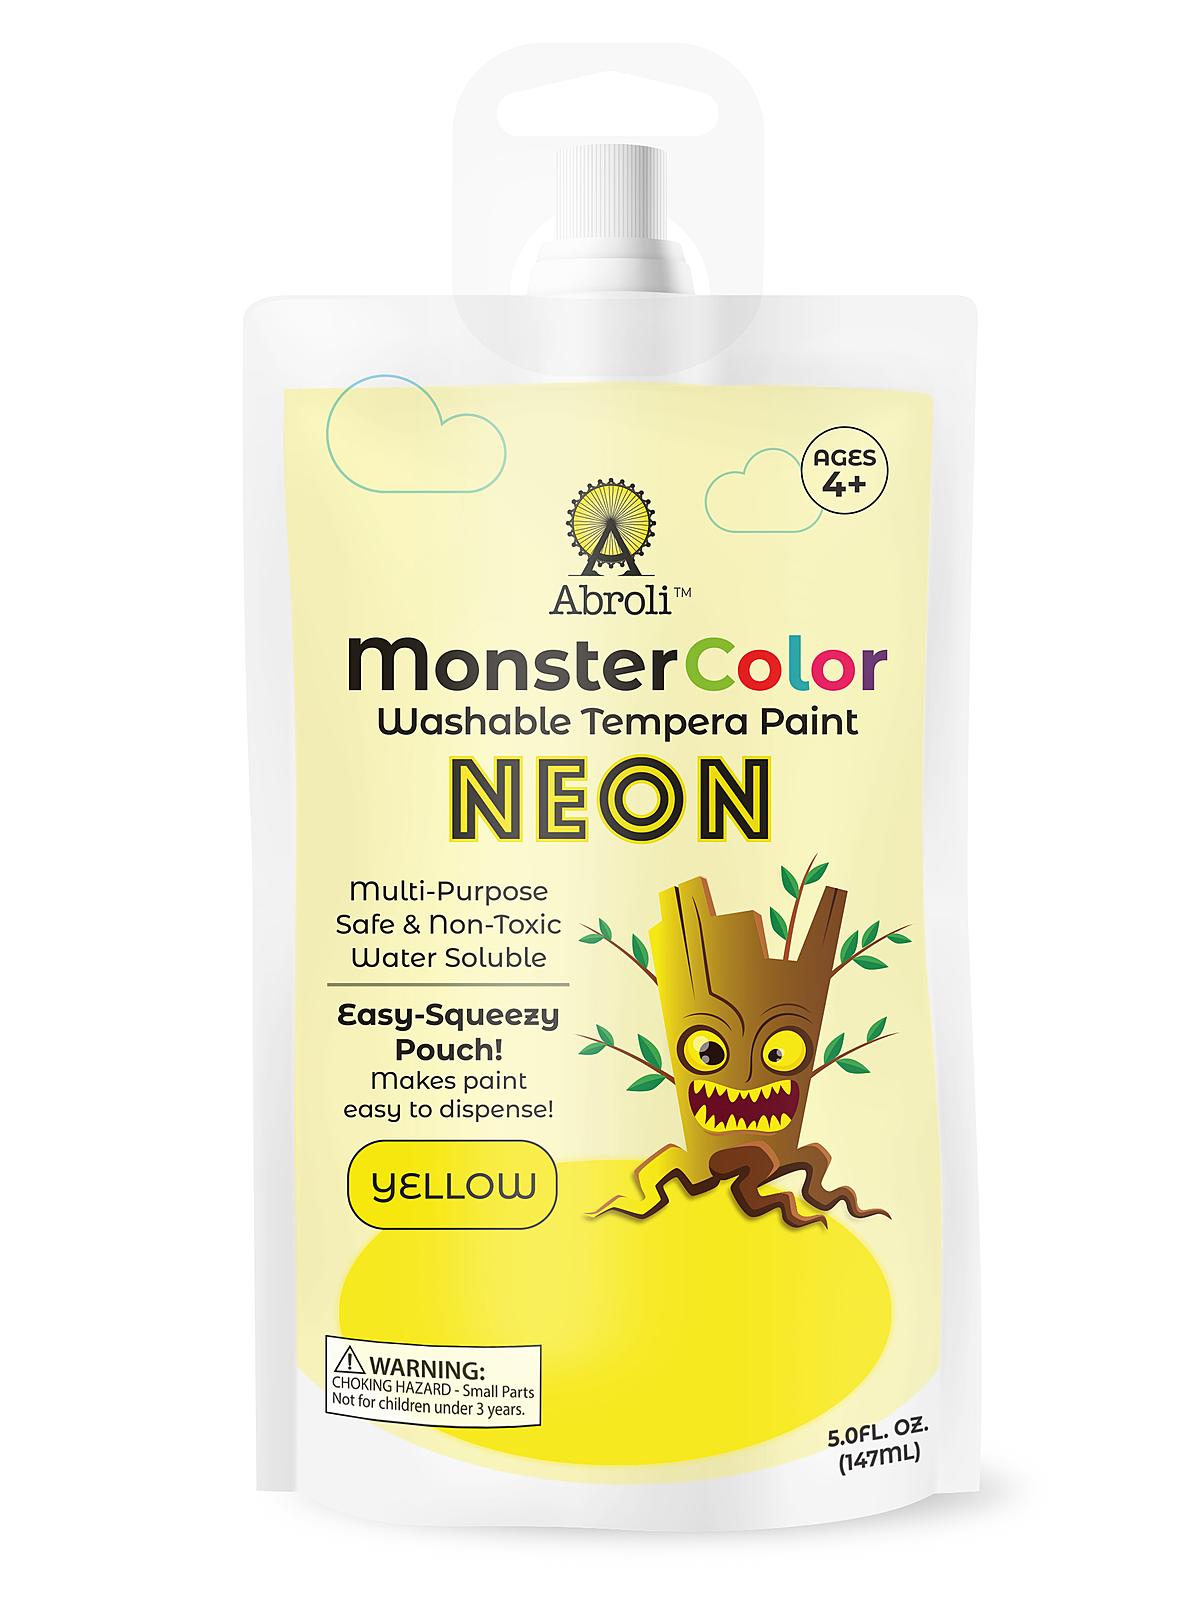 Monster Color Tempera Paint Neon Yellow 5 Oz. Pouch